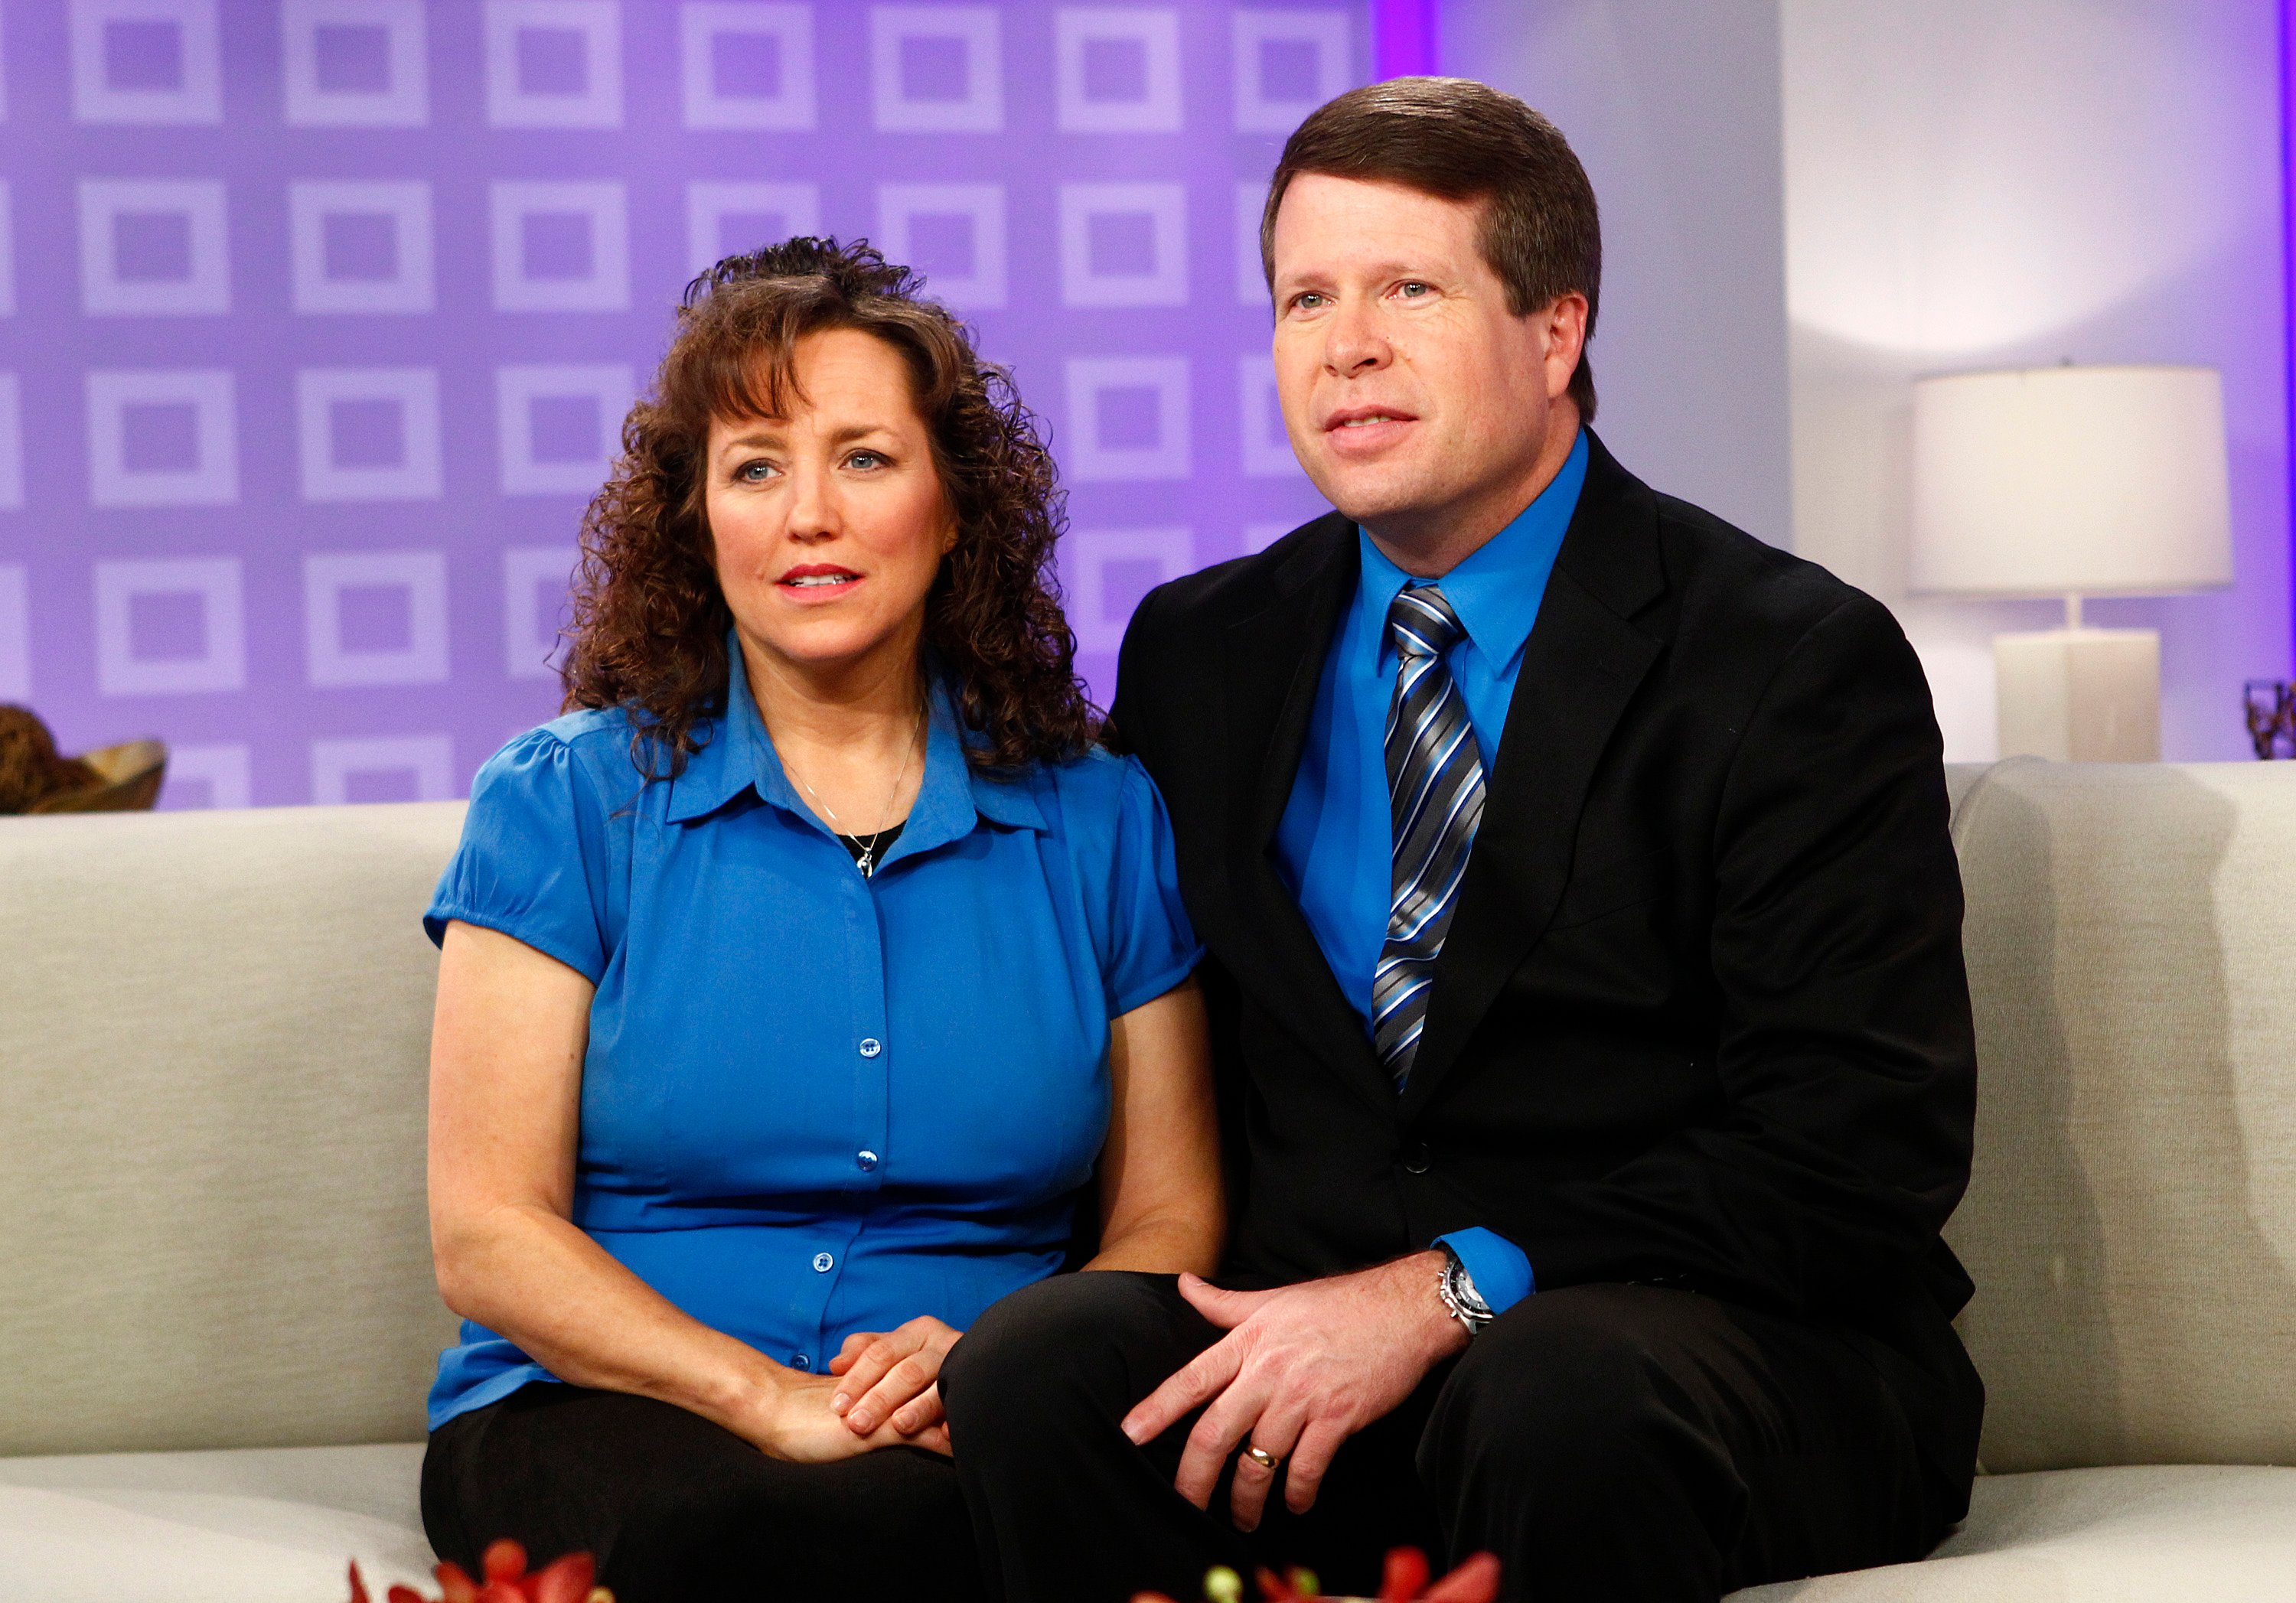 Michelle Duggar and Jim Bob Duggar sitting on a couch during an appearance on the 'Today' show